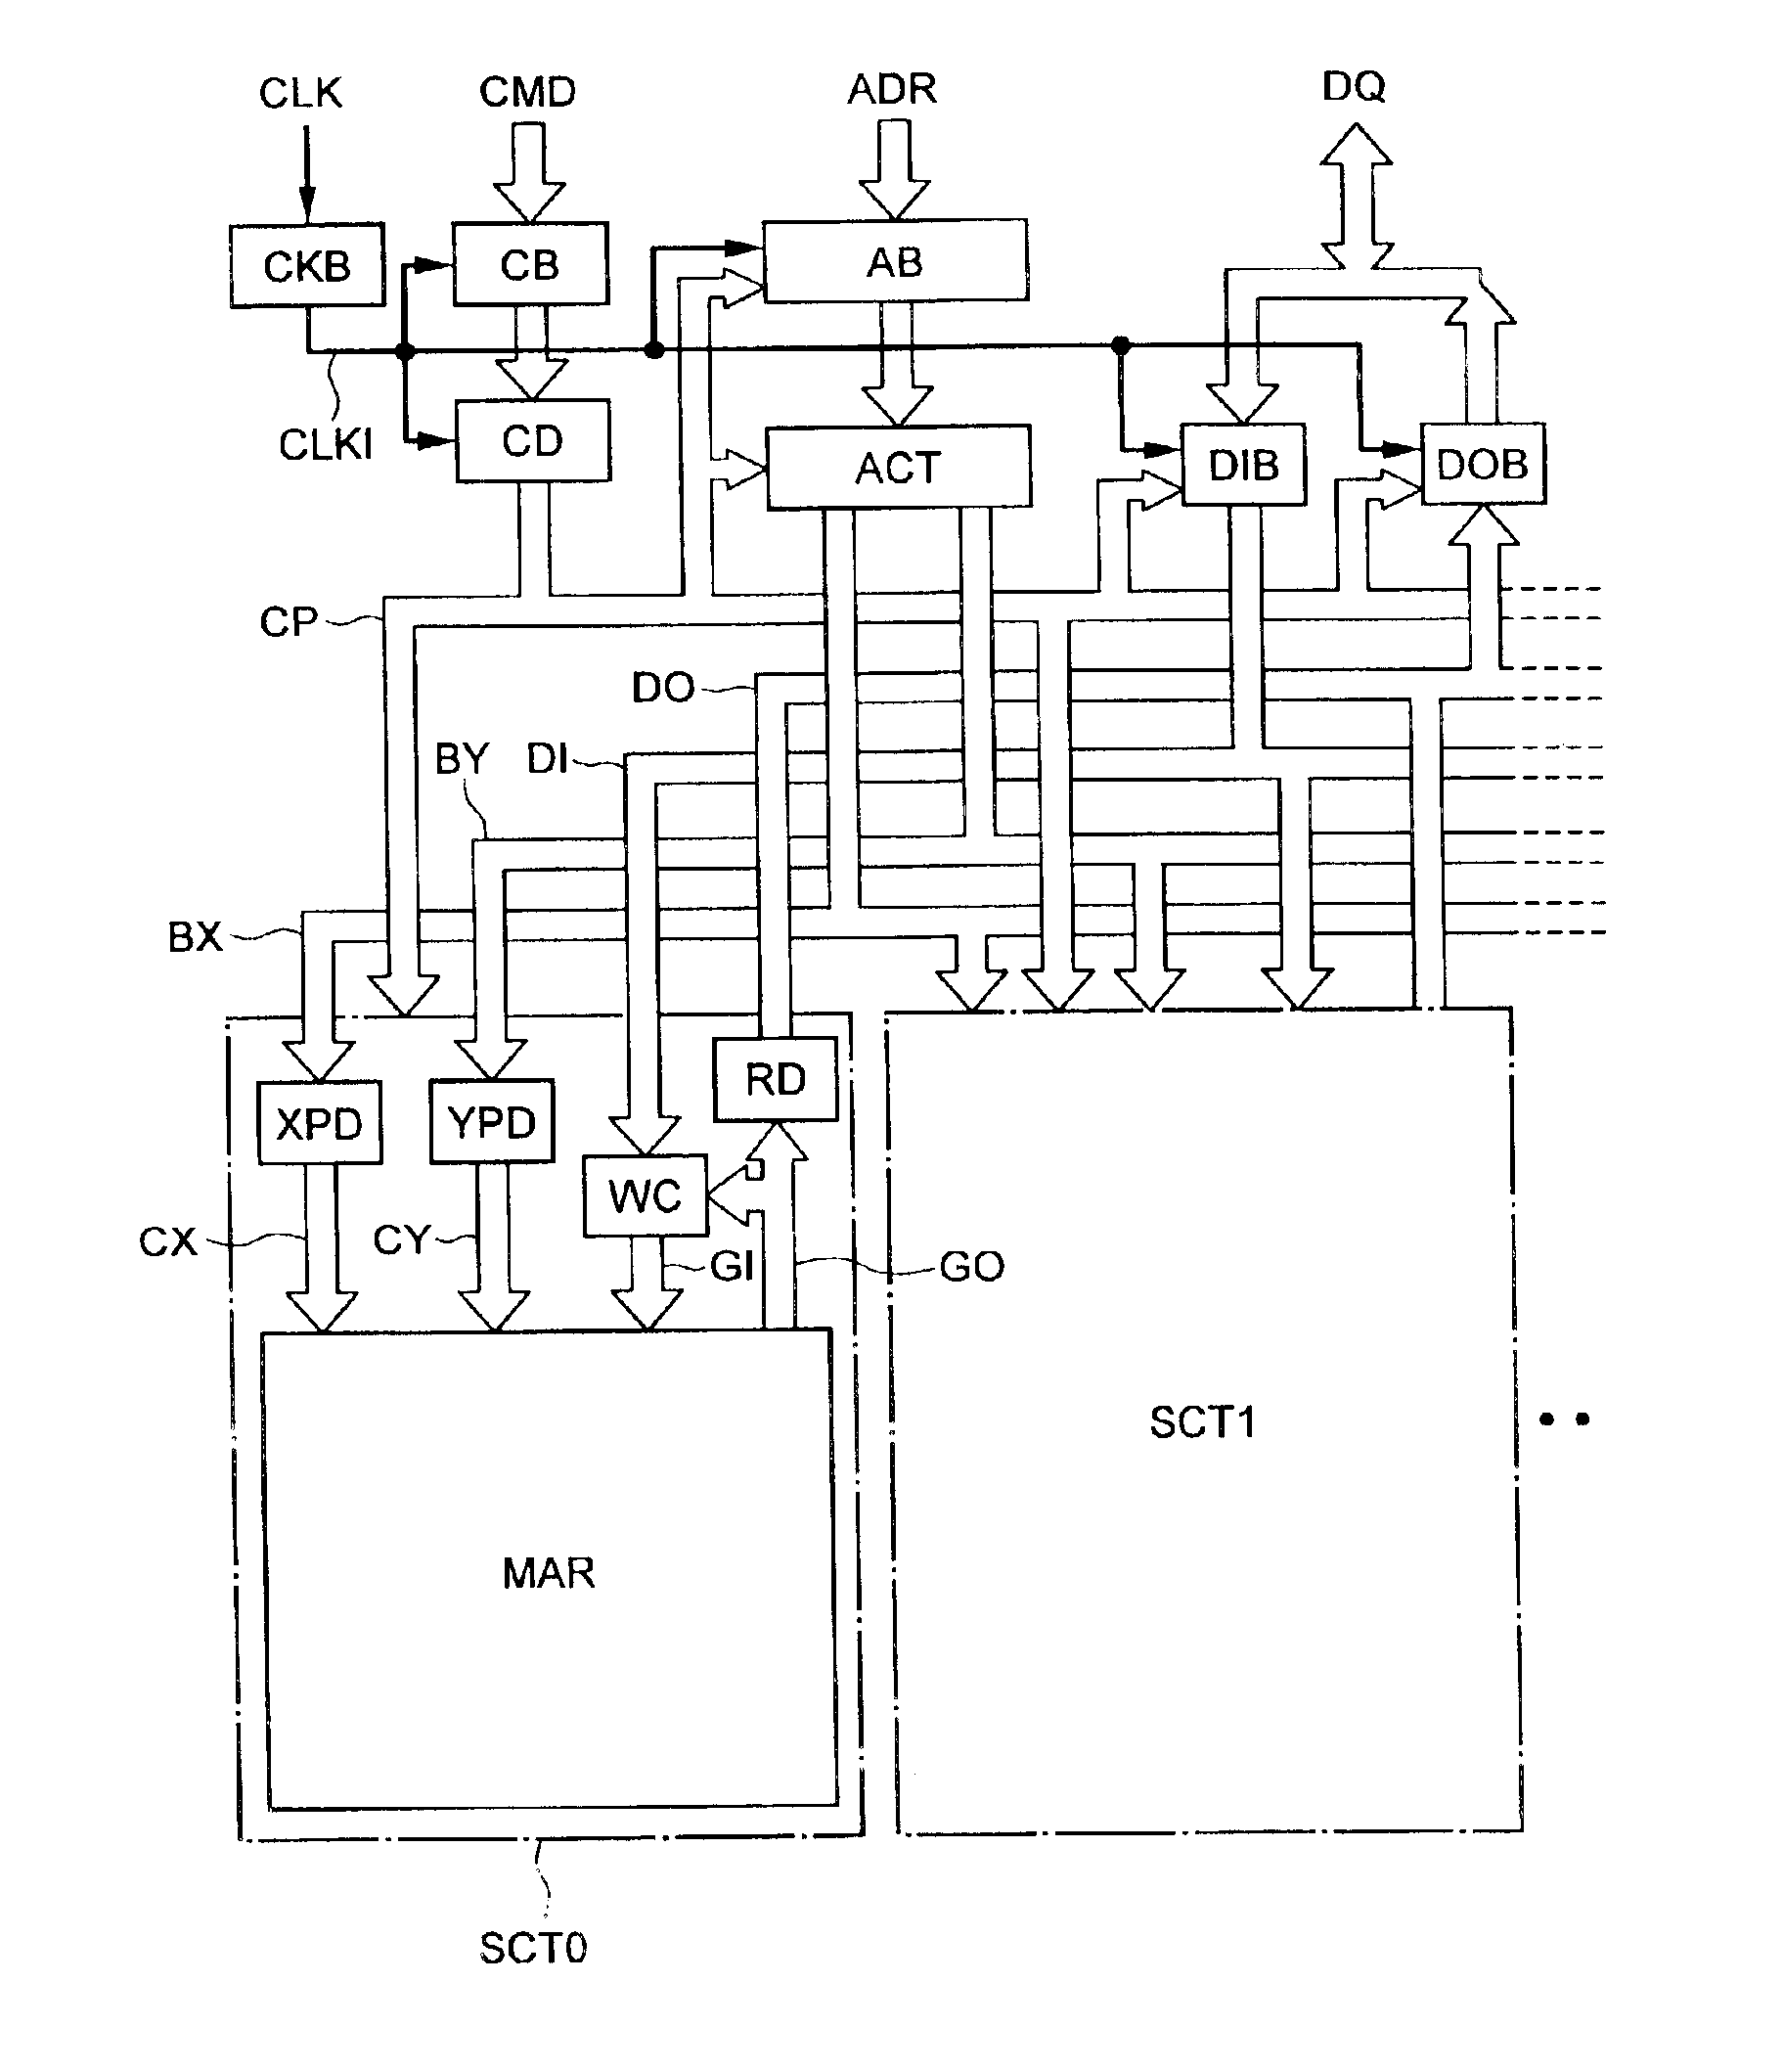 Semiconductor device which is low in power and high in speed and is highly integrated